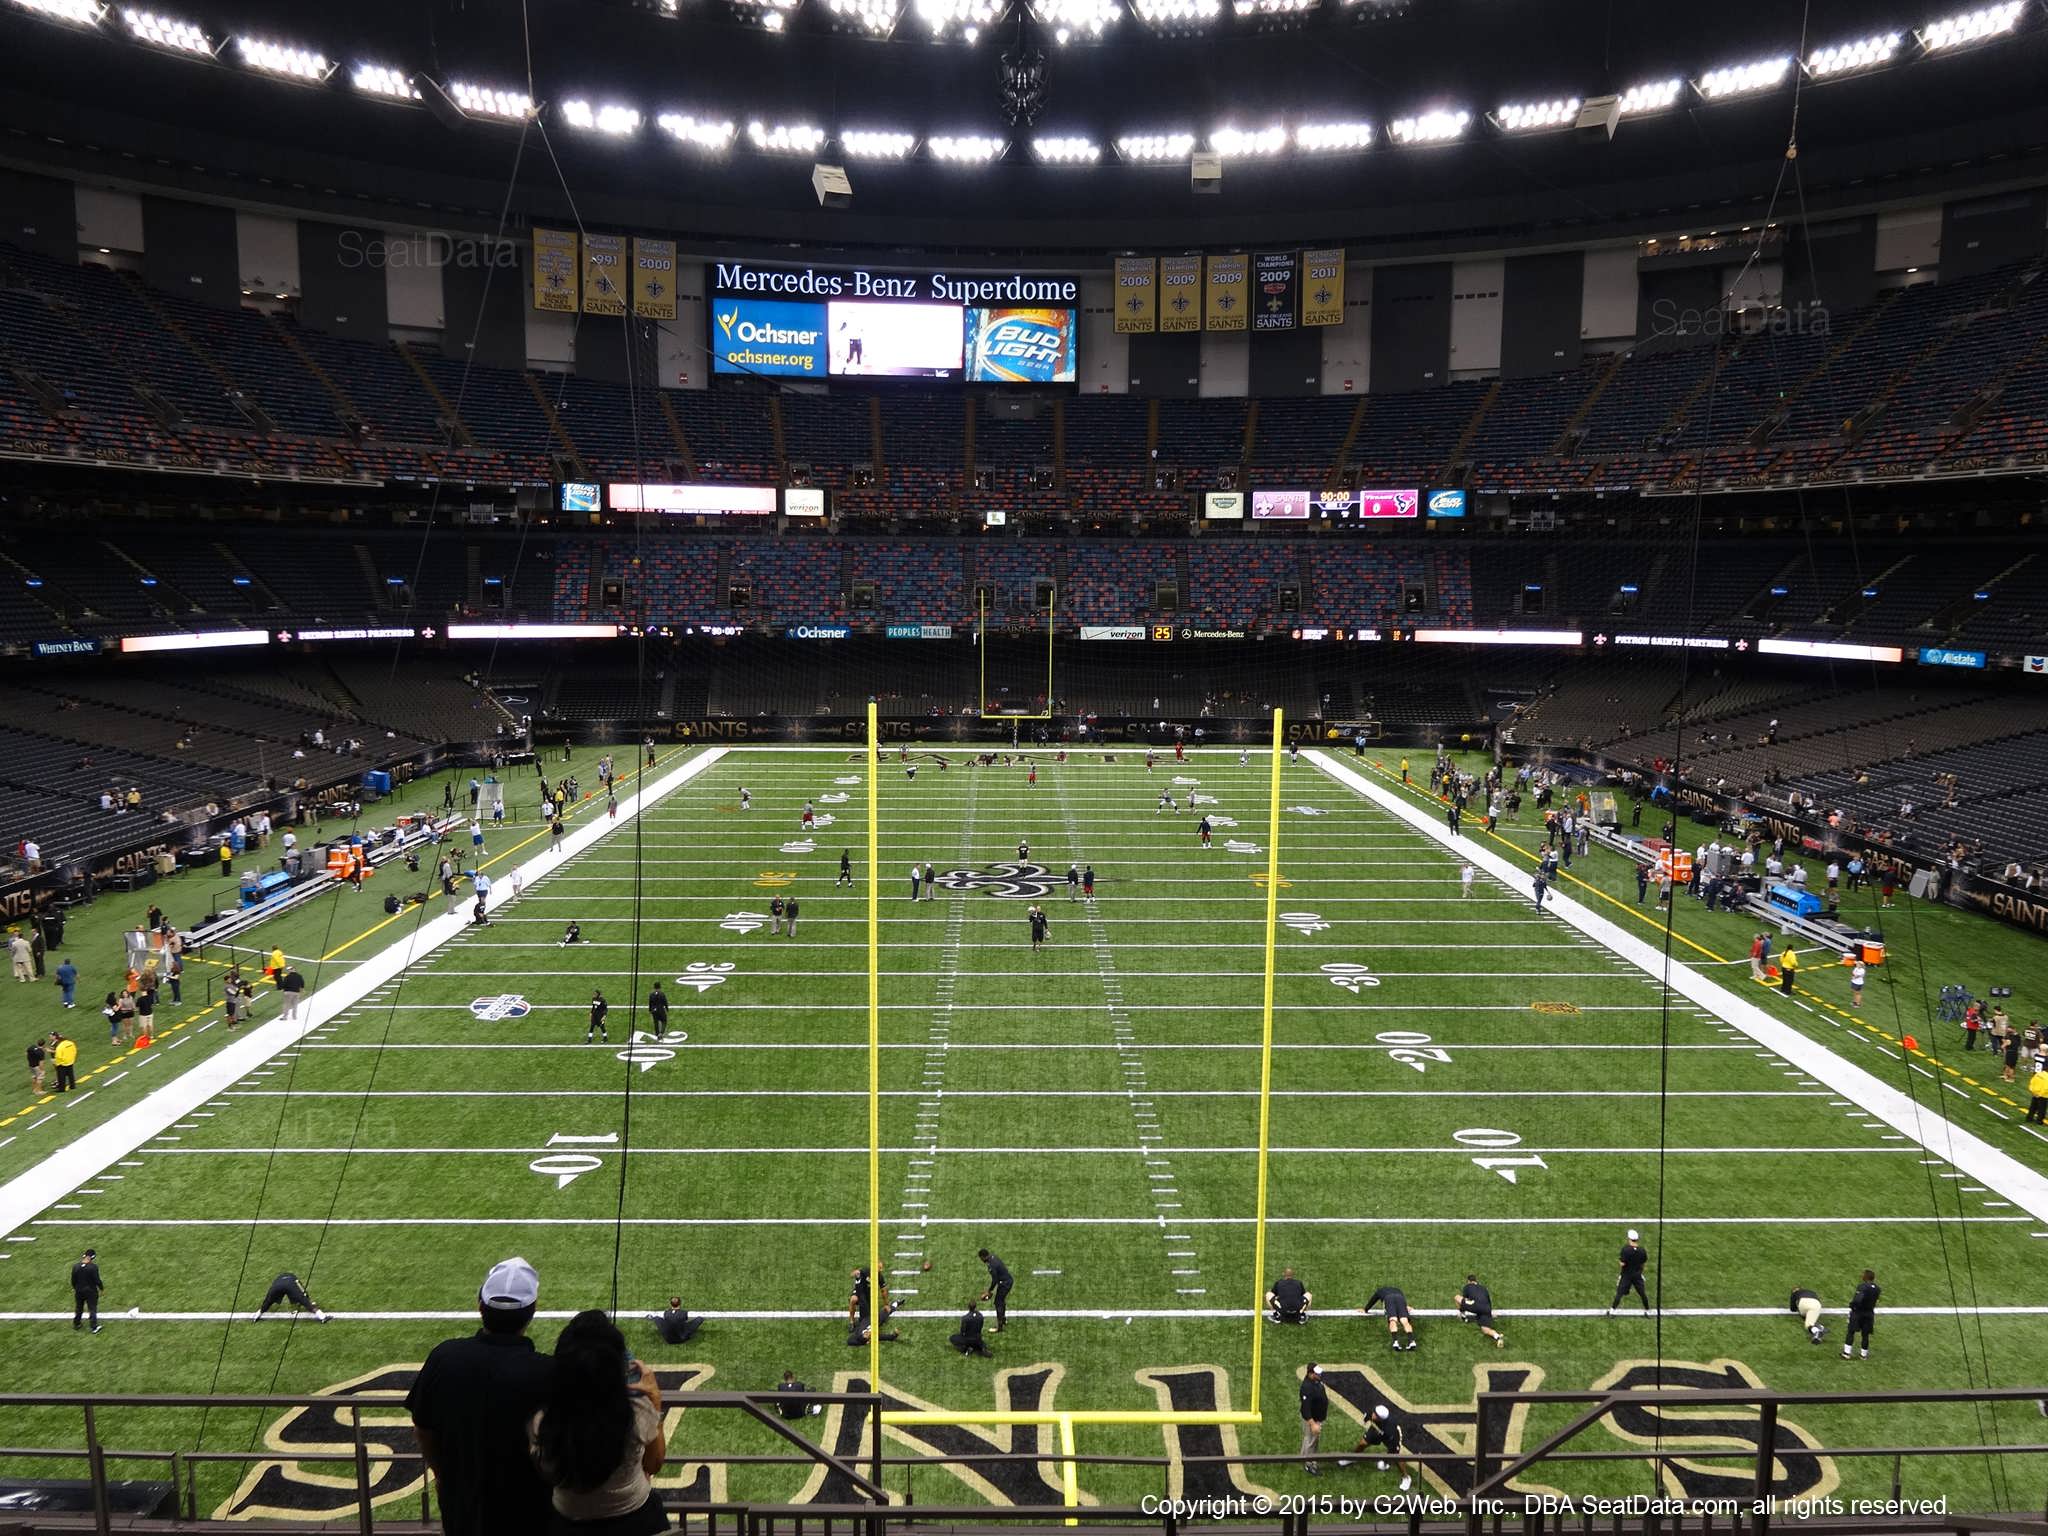 Seat view from section 324 at the Mercedes-Benz Superdome, home of the New Orleans Saints